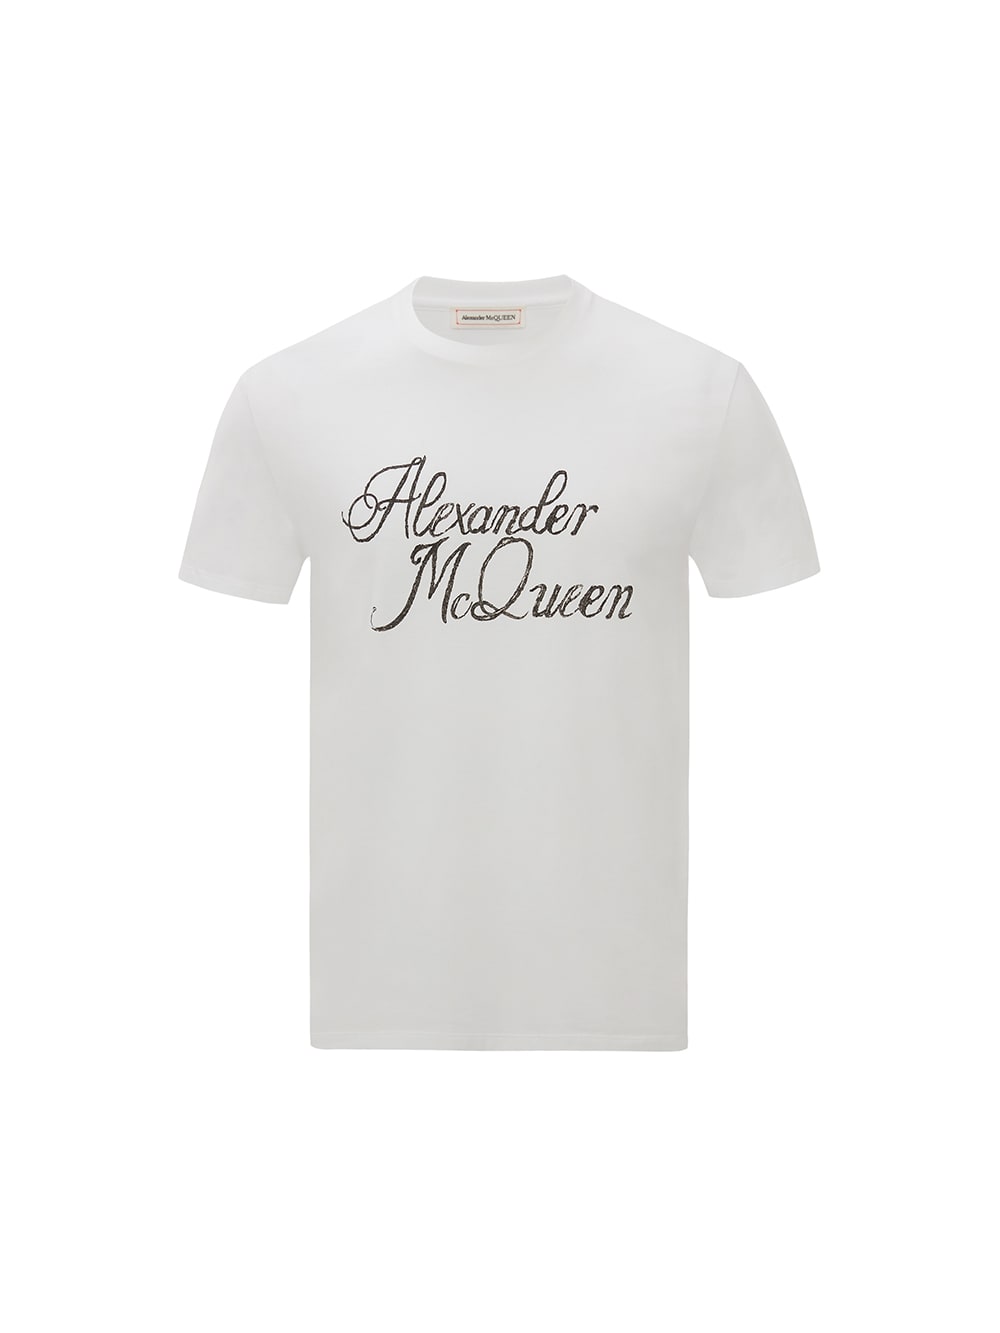 Man White T-shirt With Alexander Mcqueen Signature